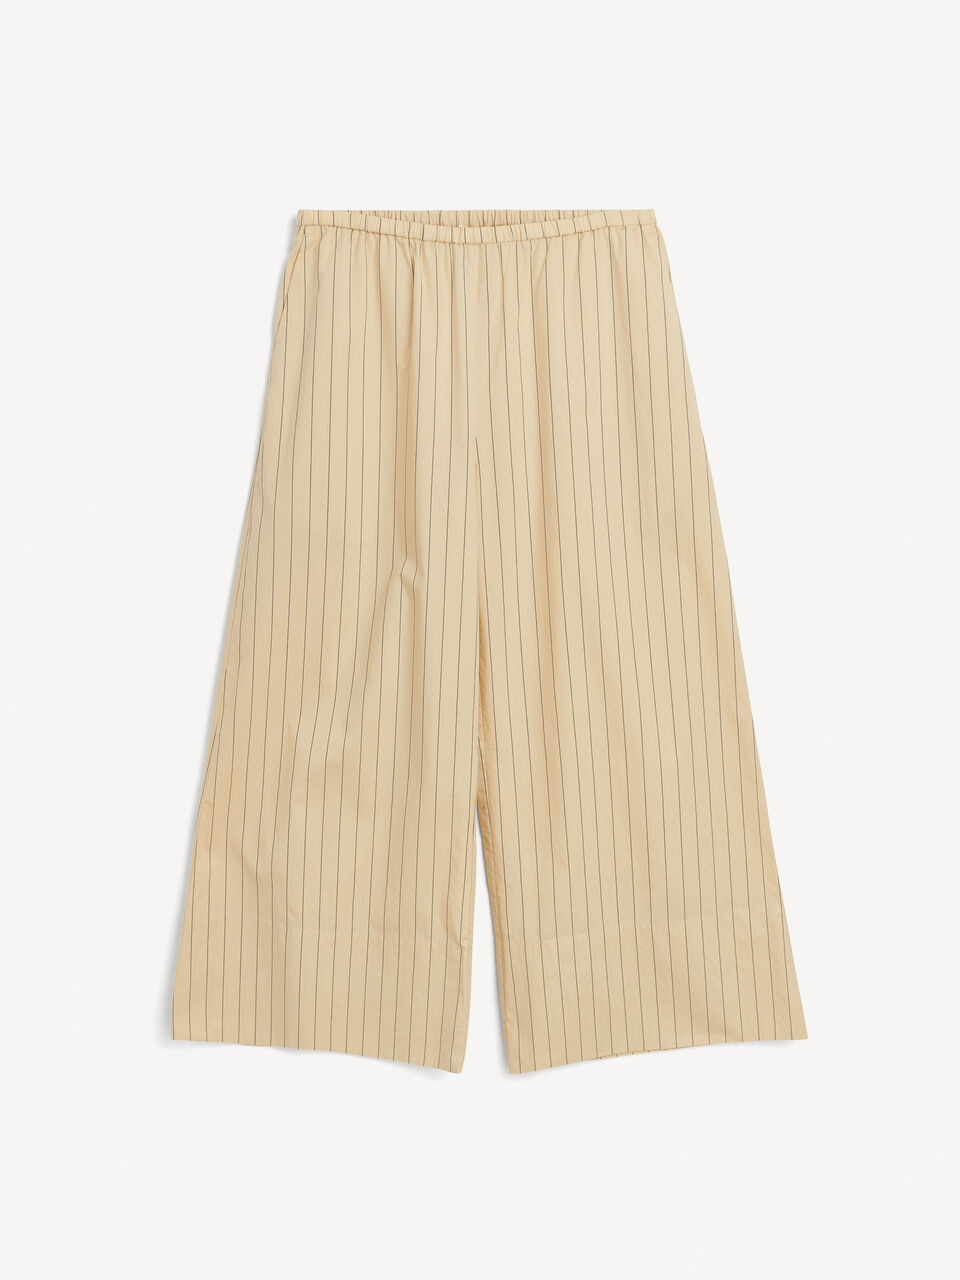 Luisa high-waisted trousers: Pinstripe